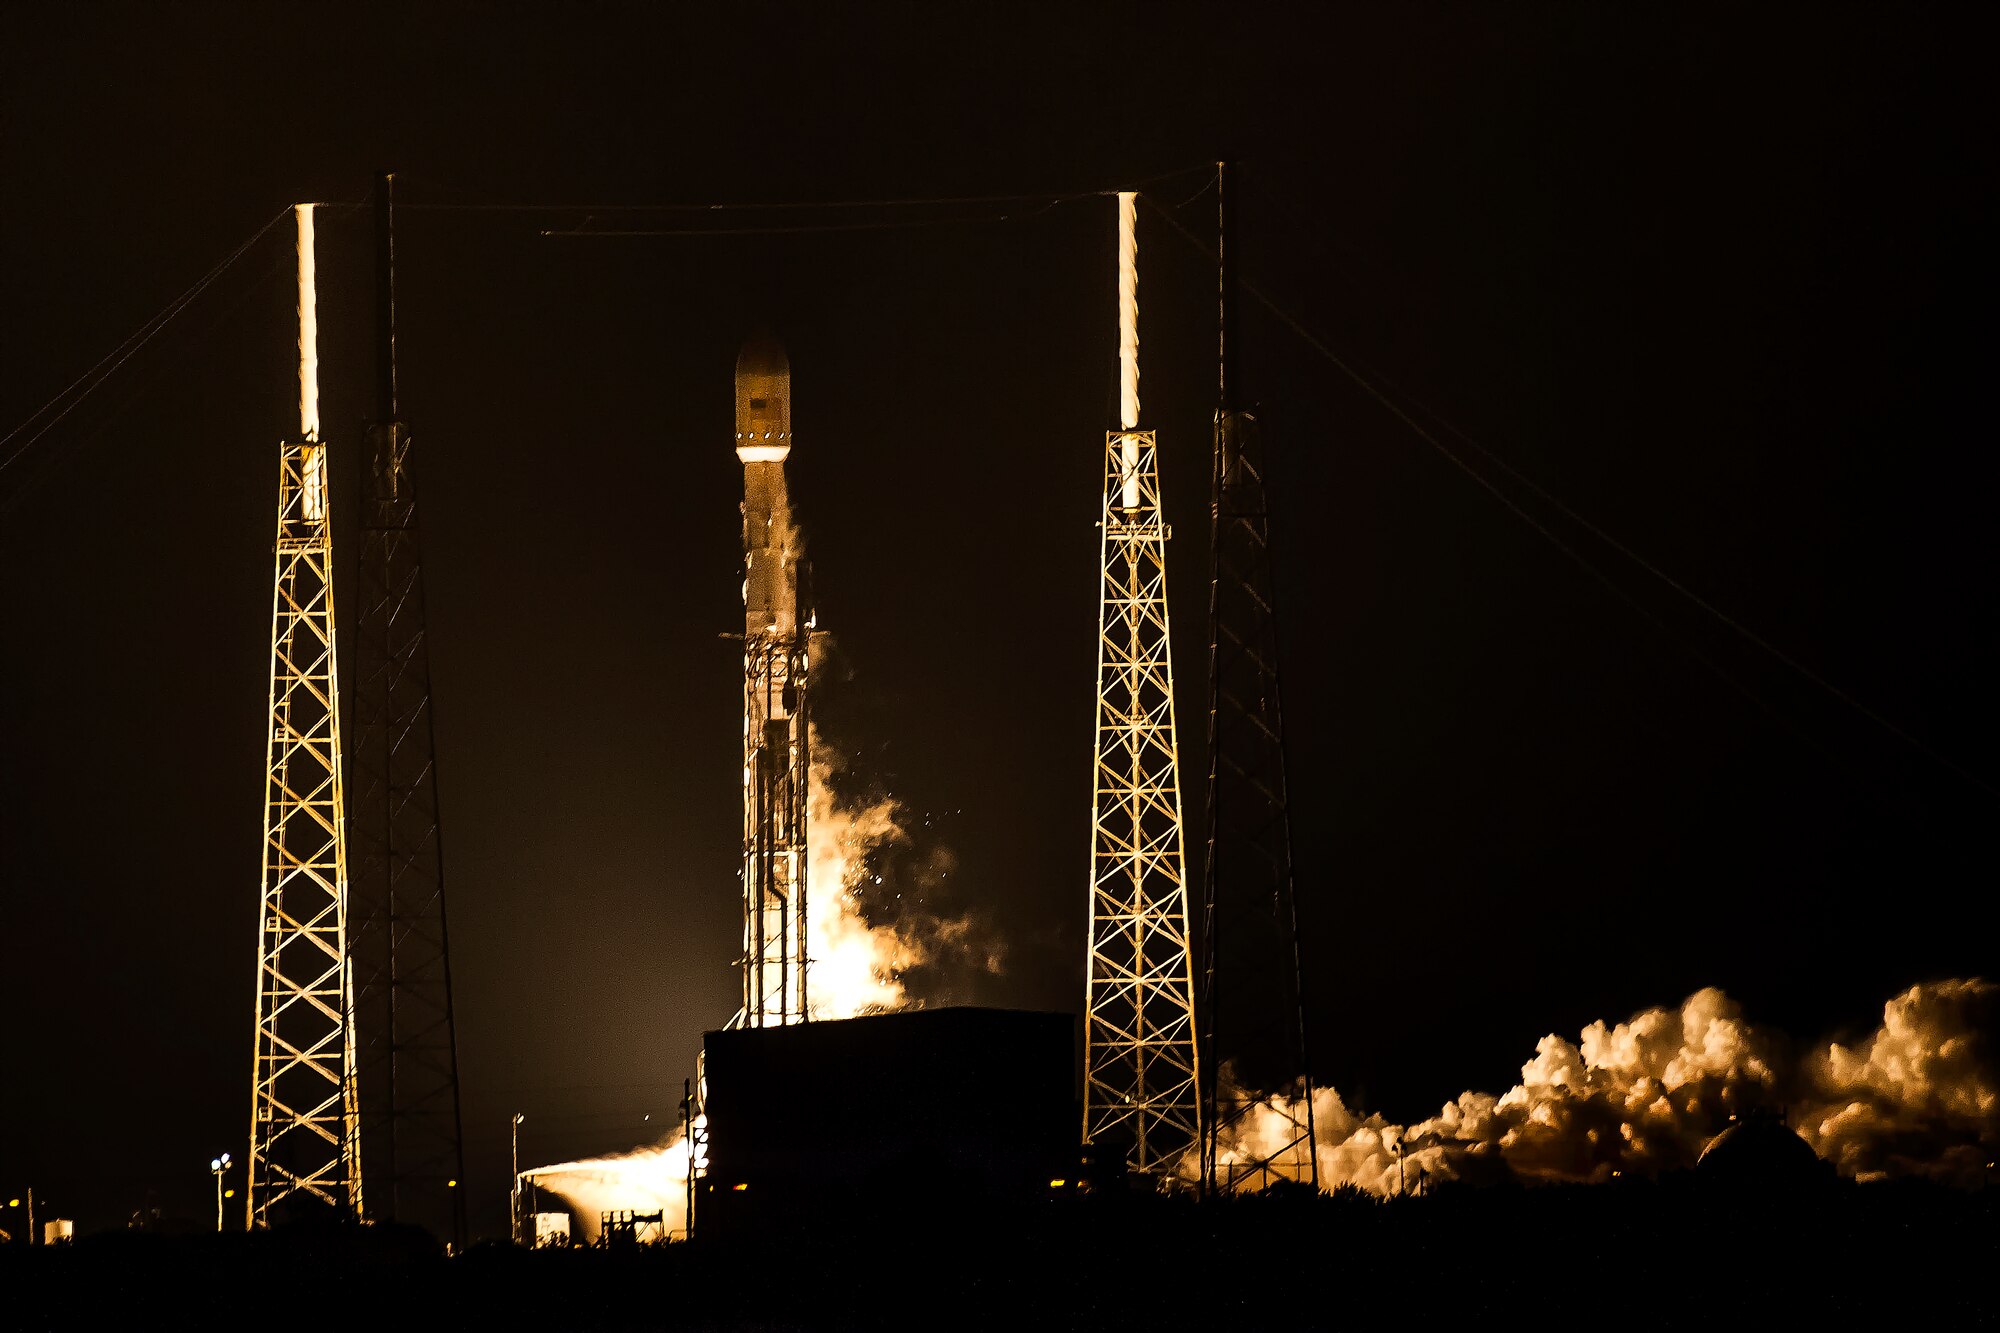 The 45th Space Wing supported Space Exploration Technologies' (SpaceX) successful launch of the Falcon 9 rocket carrying the AsiaSat 8 satellite Aug. 5 at 4 a.m. from Space Launch Complex 40, Cape Canaveral Air Force Station, Fla. (Courtesy photo/John Studwell/AmericaSpace)